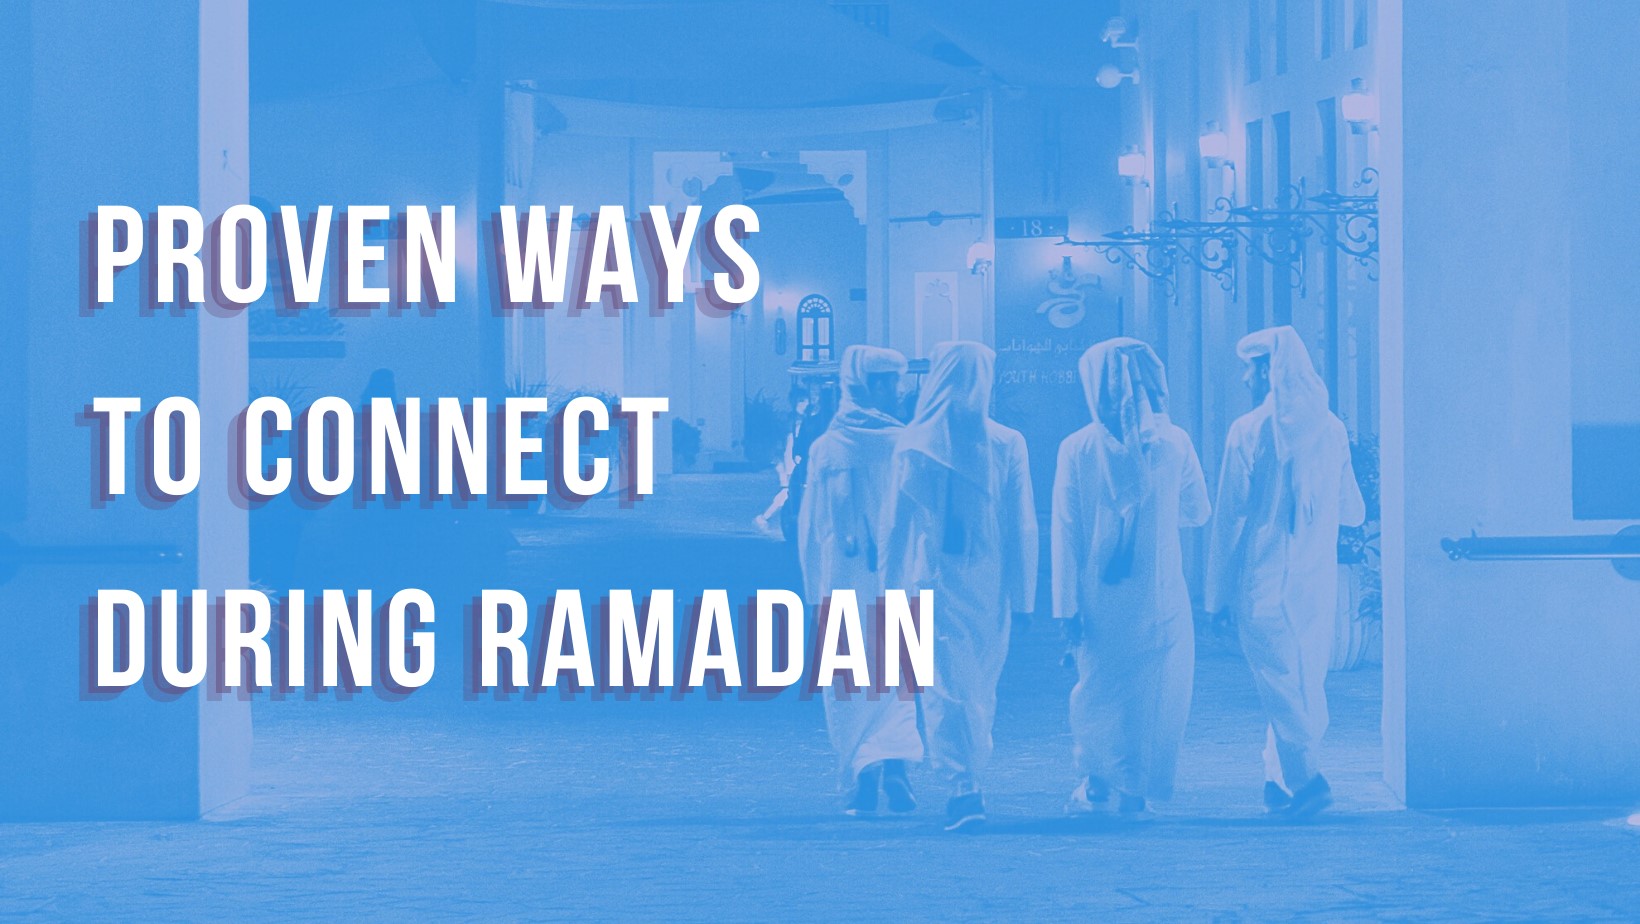 Proven ways to connect during Ramadan